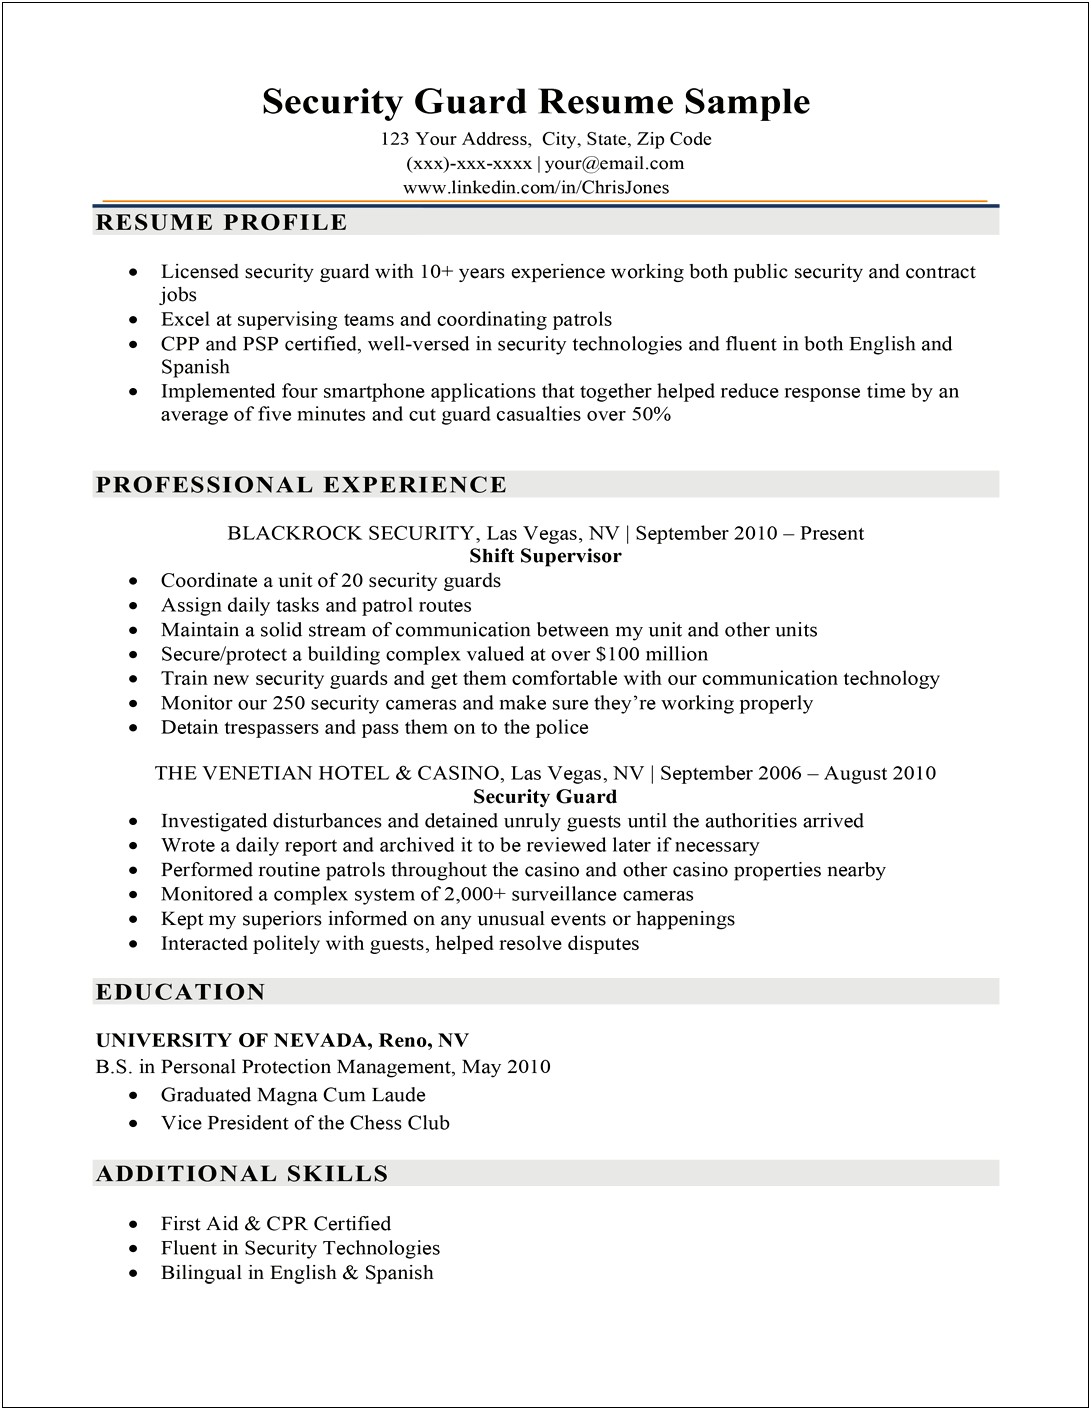 Security Guard Resume Job Description Dealing With People